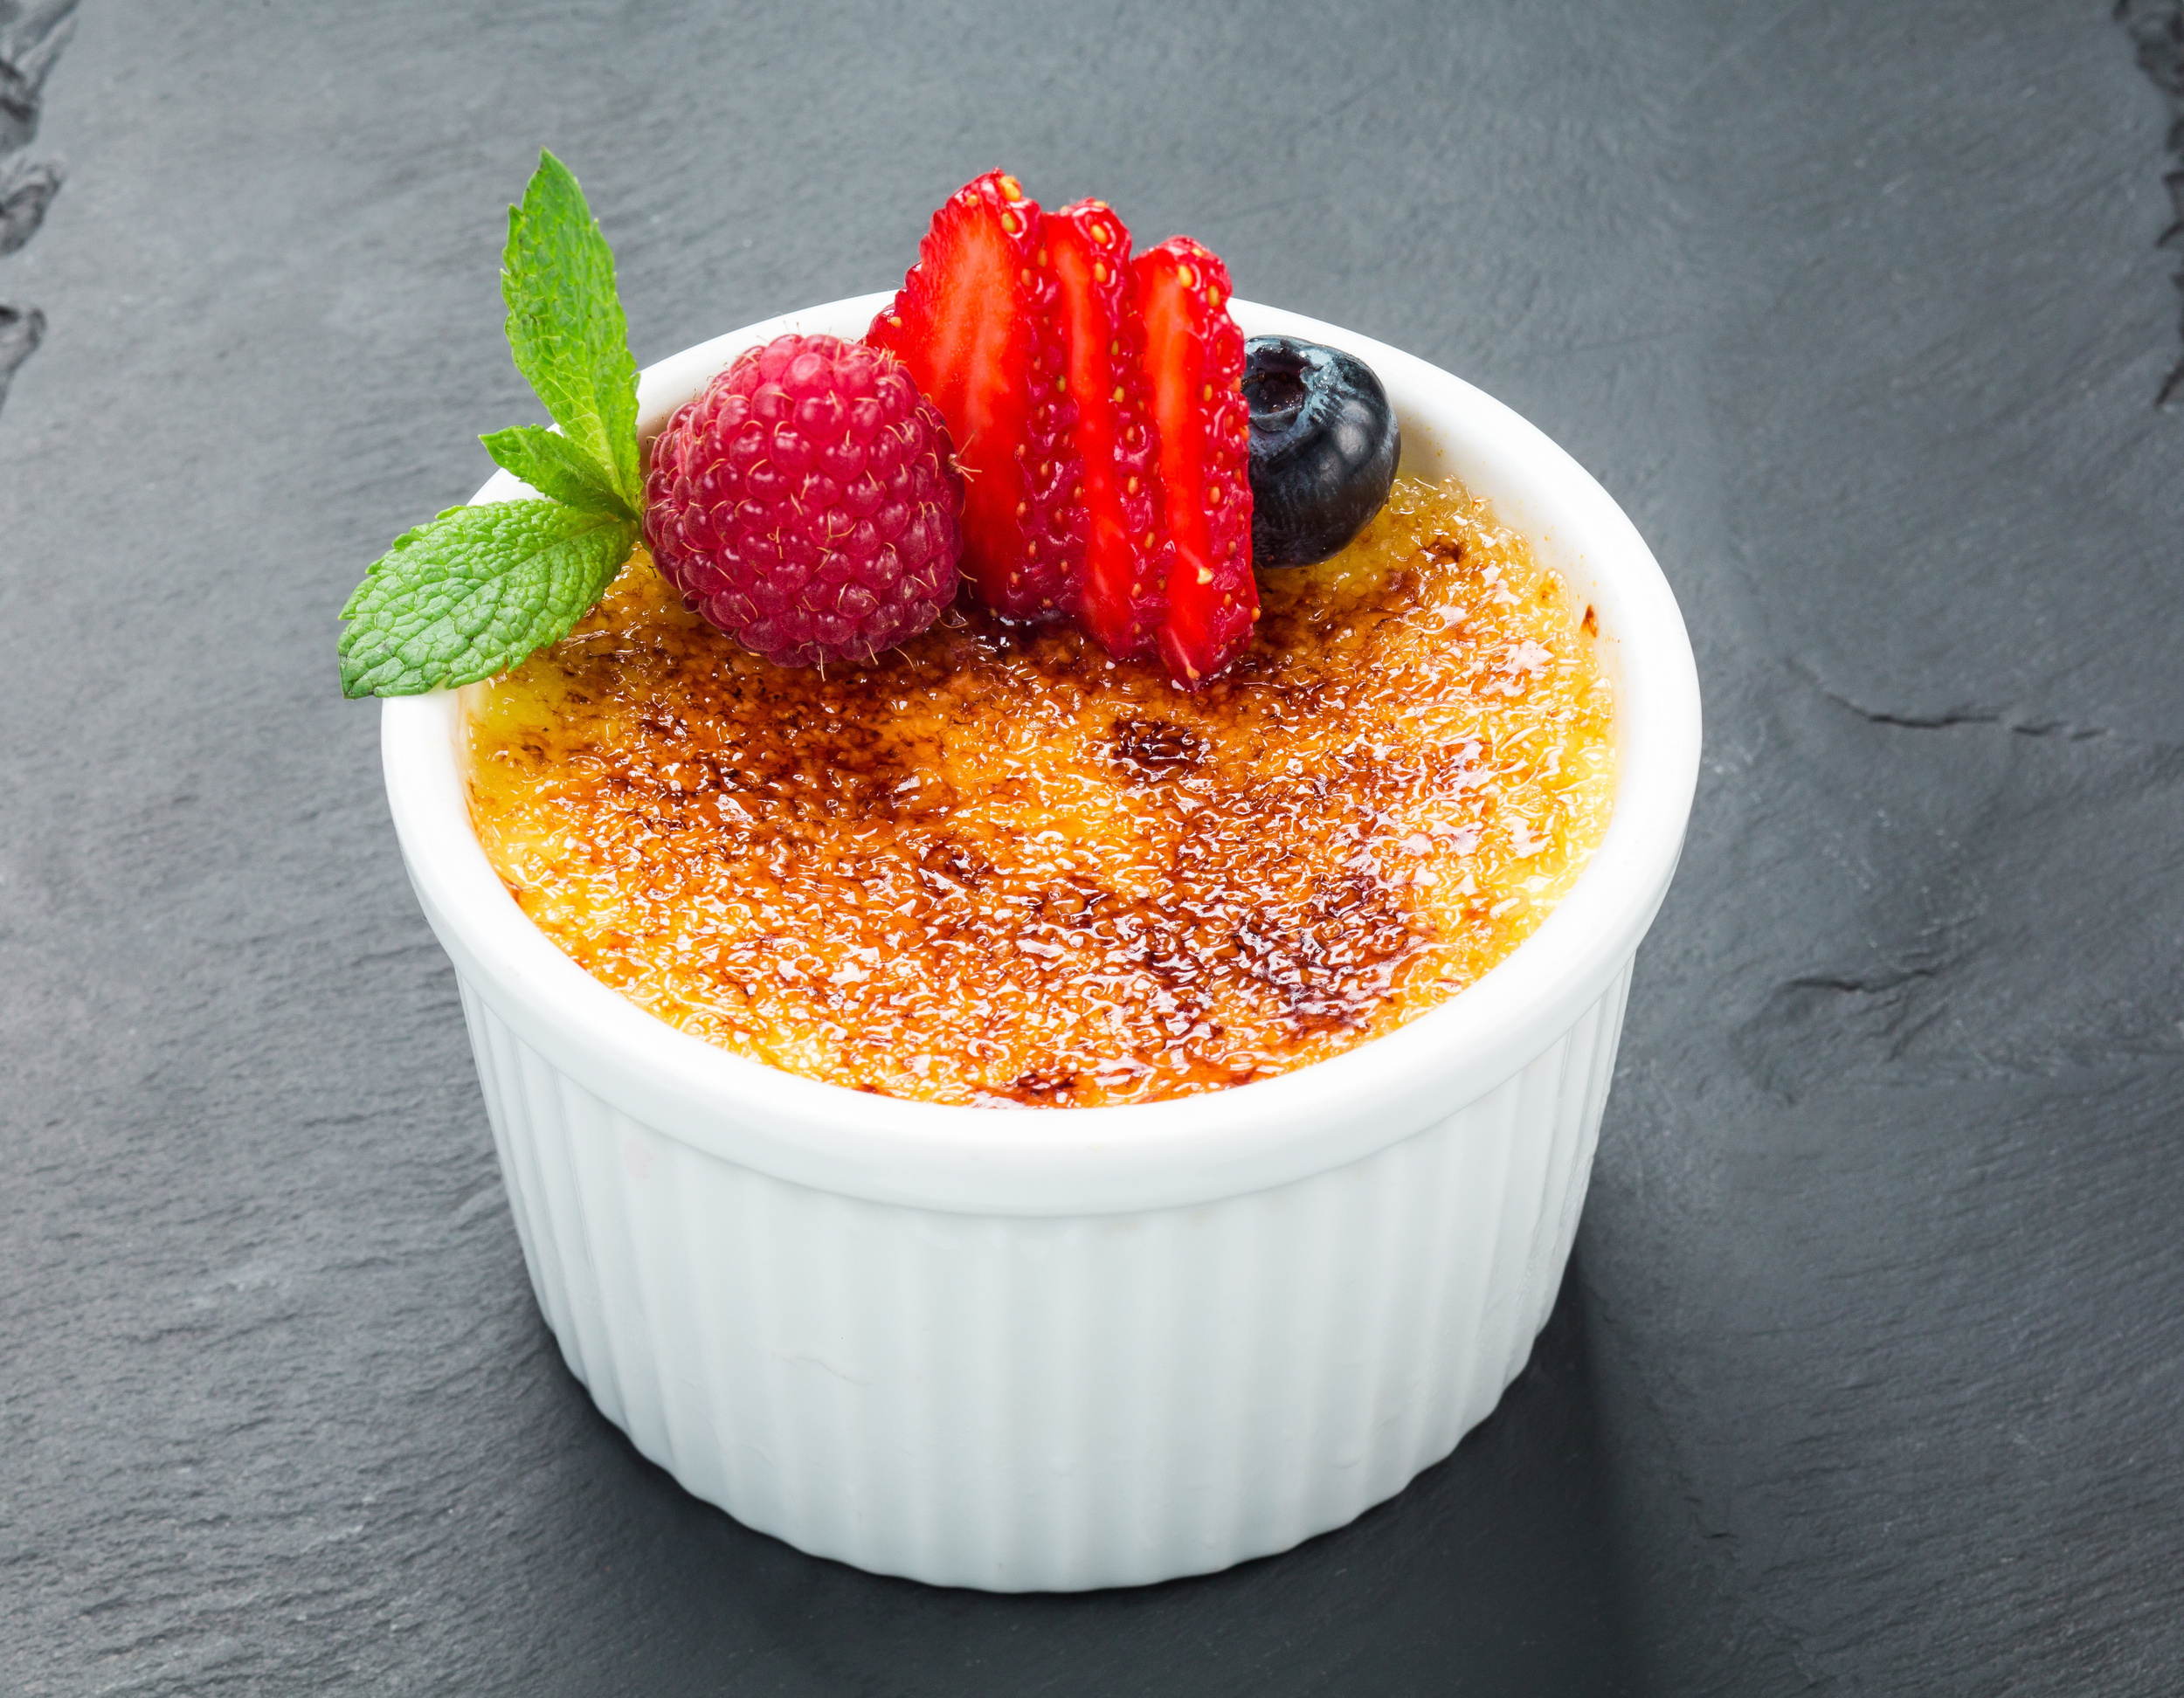 <p>We’re down for any dessert that requires a blowtorch — especially one as delicious as crème brûlée. Don’t be intimidated by the fancy multi-accented name or the necessary firepower, as <a href="https://therecipecritic.com/creme-brulee/"><span>this five-ingredient version from The Recipe Critic</span></a> is so easy that even a first-timer can handle preparing this famous French dish.</p><p><a href='https://www.msn.com/en-us/community/channel/vid-cj9pqbr0vn9in2b6ddcd8sfgpfq6x6utp44fssrv6mc2gtybw0us'>Follow us on MSN to see more of our exclusive lifestyle content.</a></p>